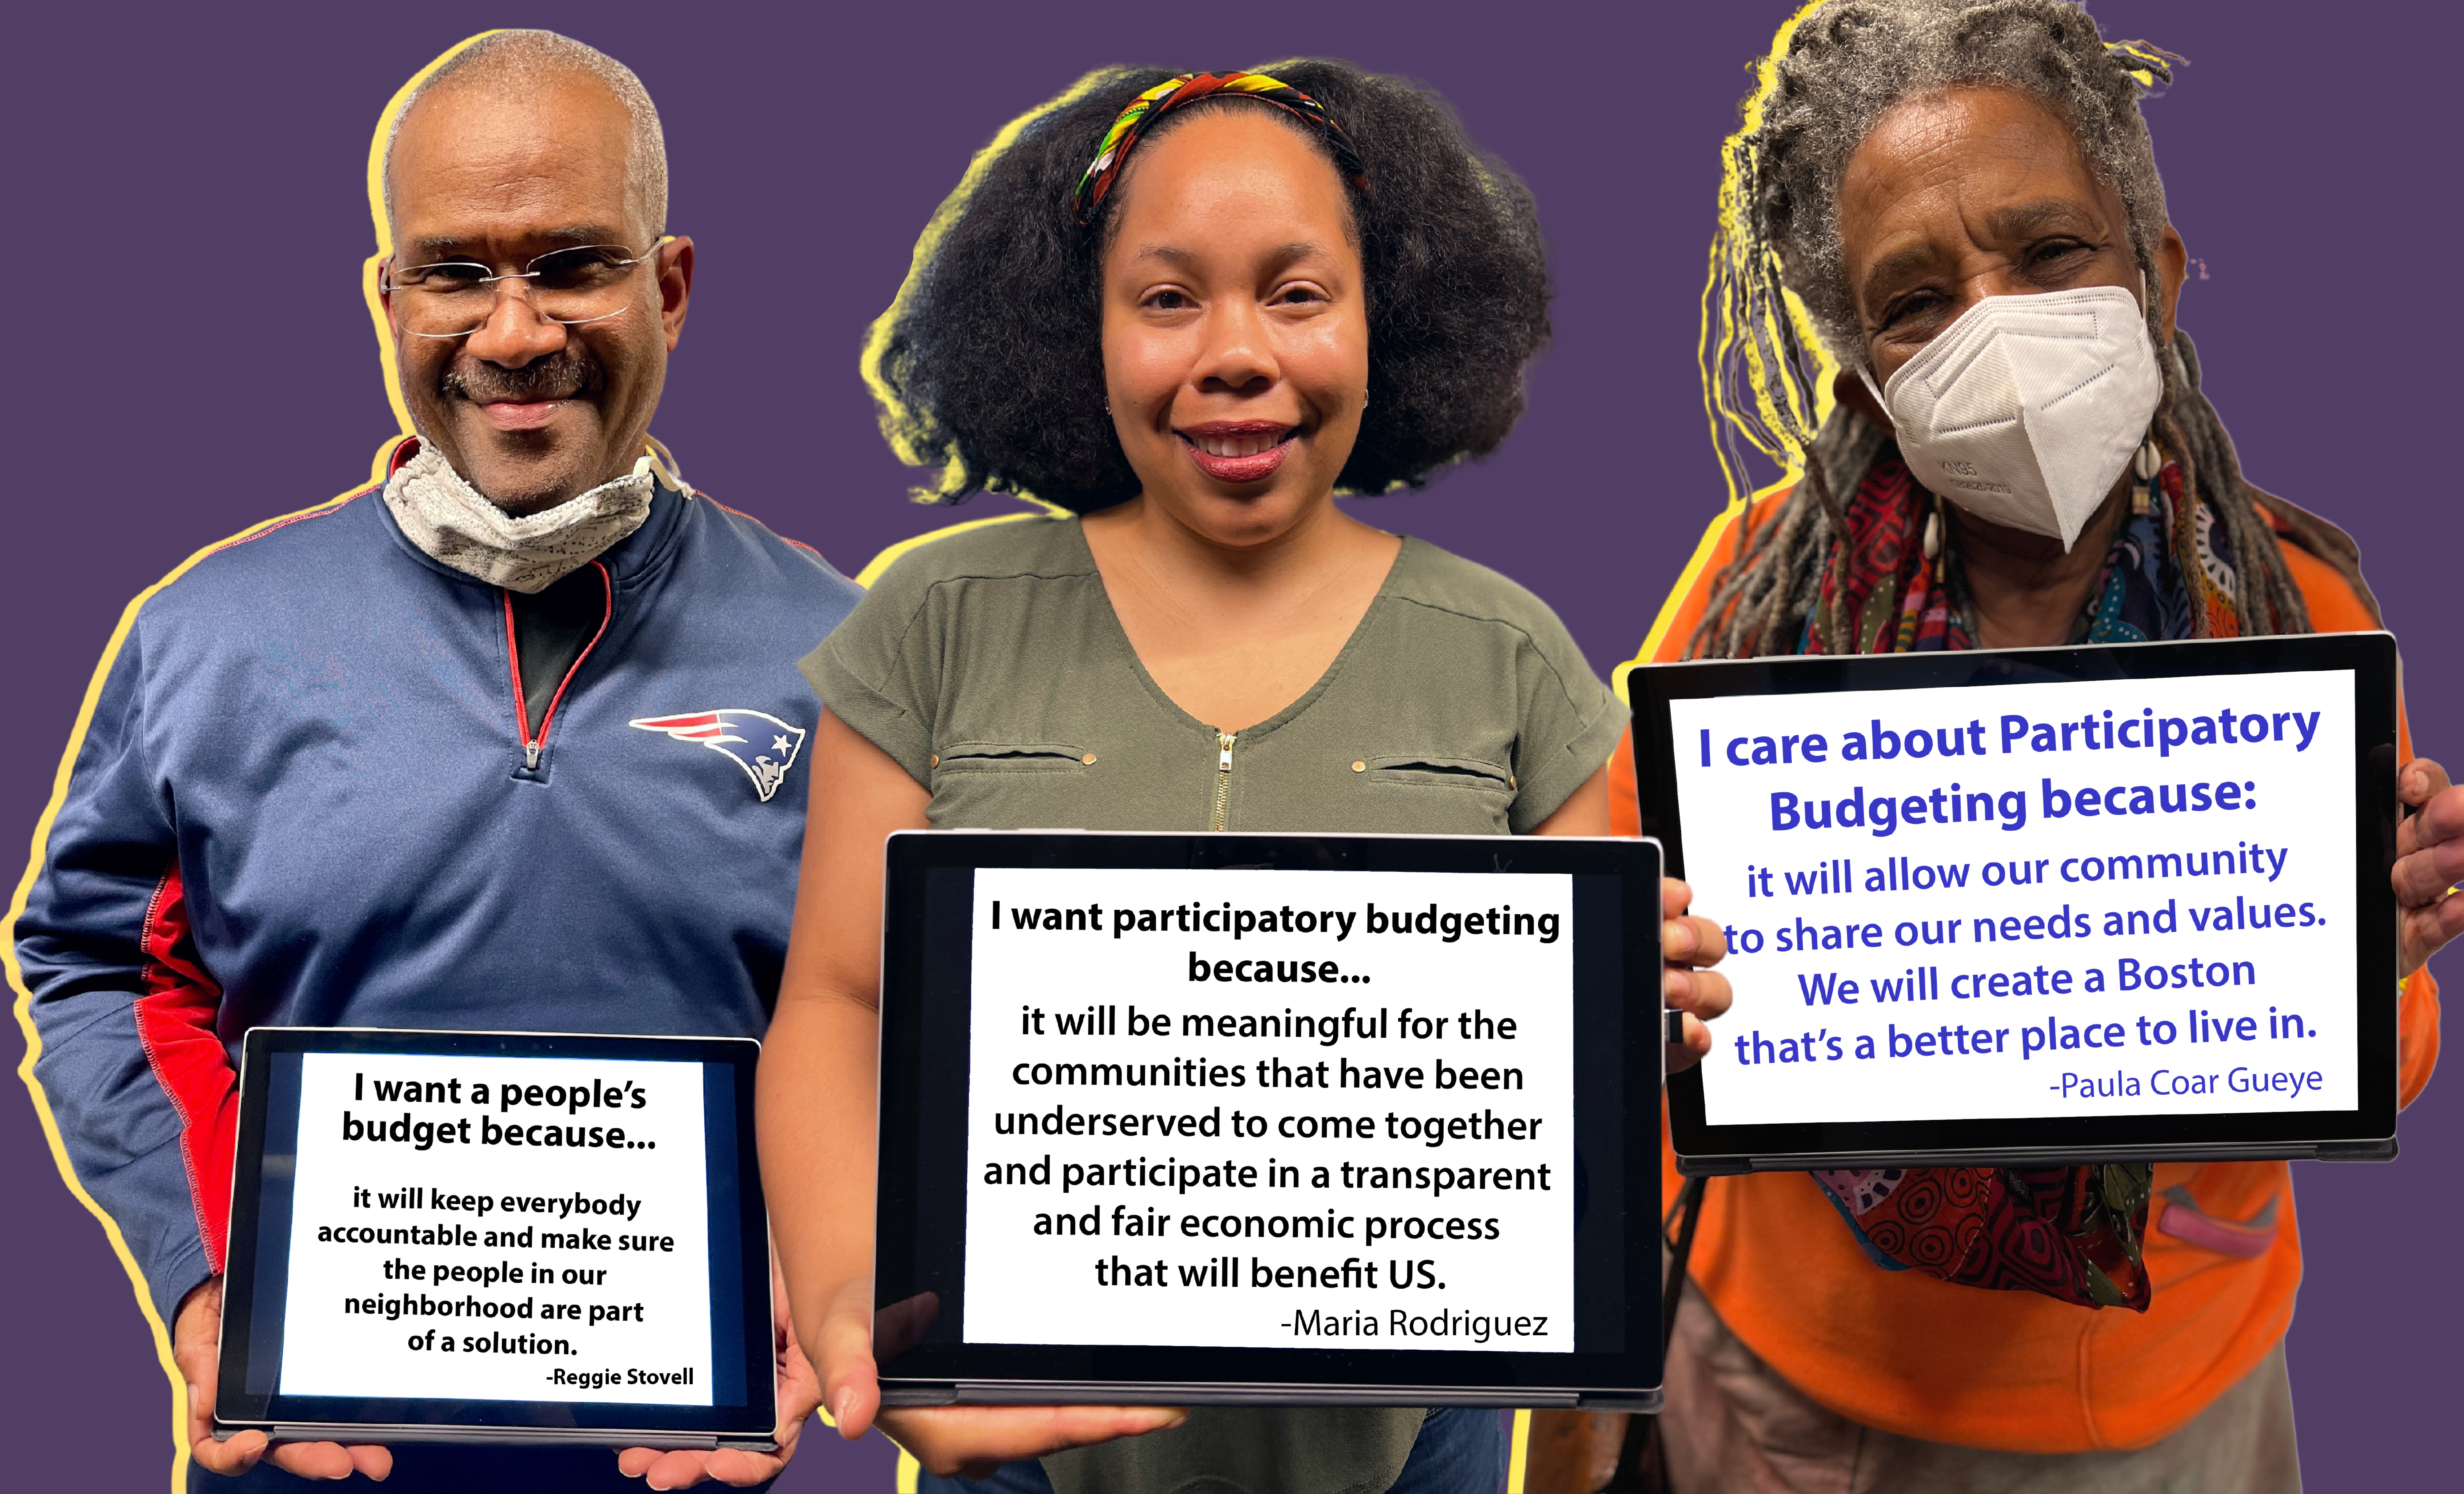 image of three people, their outlines cut out with a yellow halo surrounding them on a solid purple background. Each of the three people of color are holding up tablets with quotes printed on them about why they care about or want PB